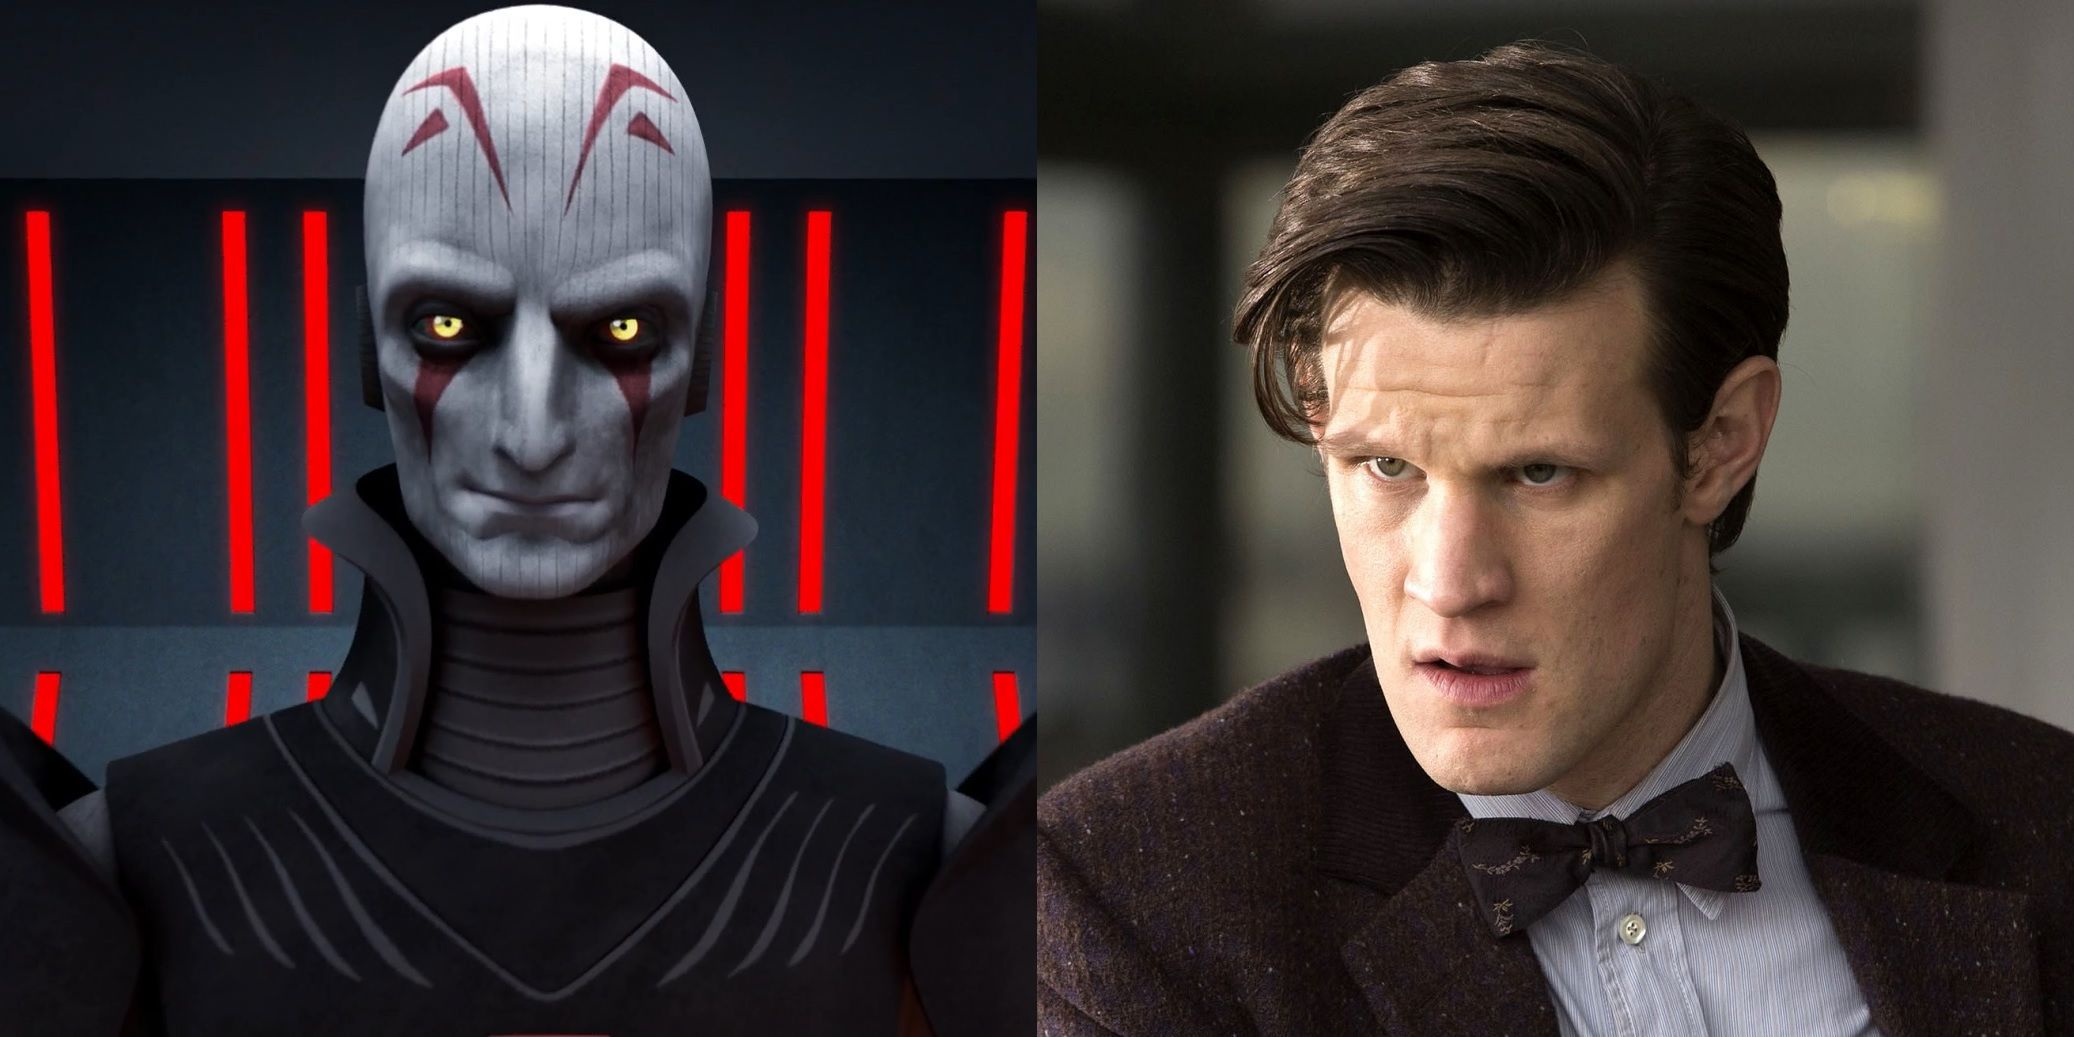 The Grand Inquisitor in Rebels and Matt Smith in Doctor Who